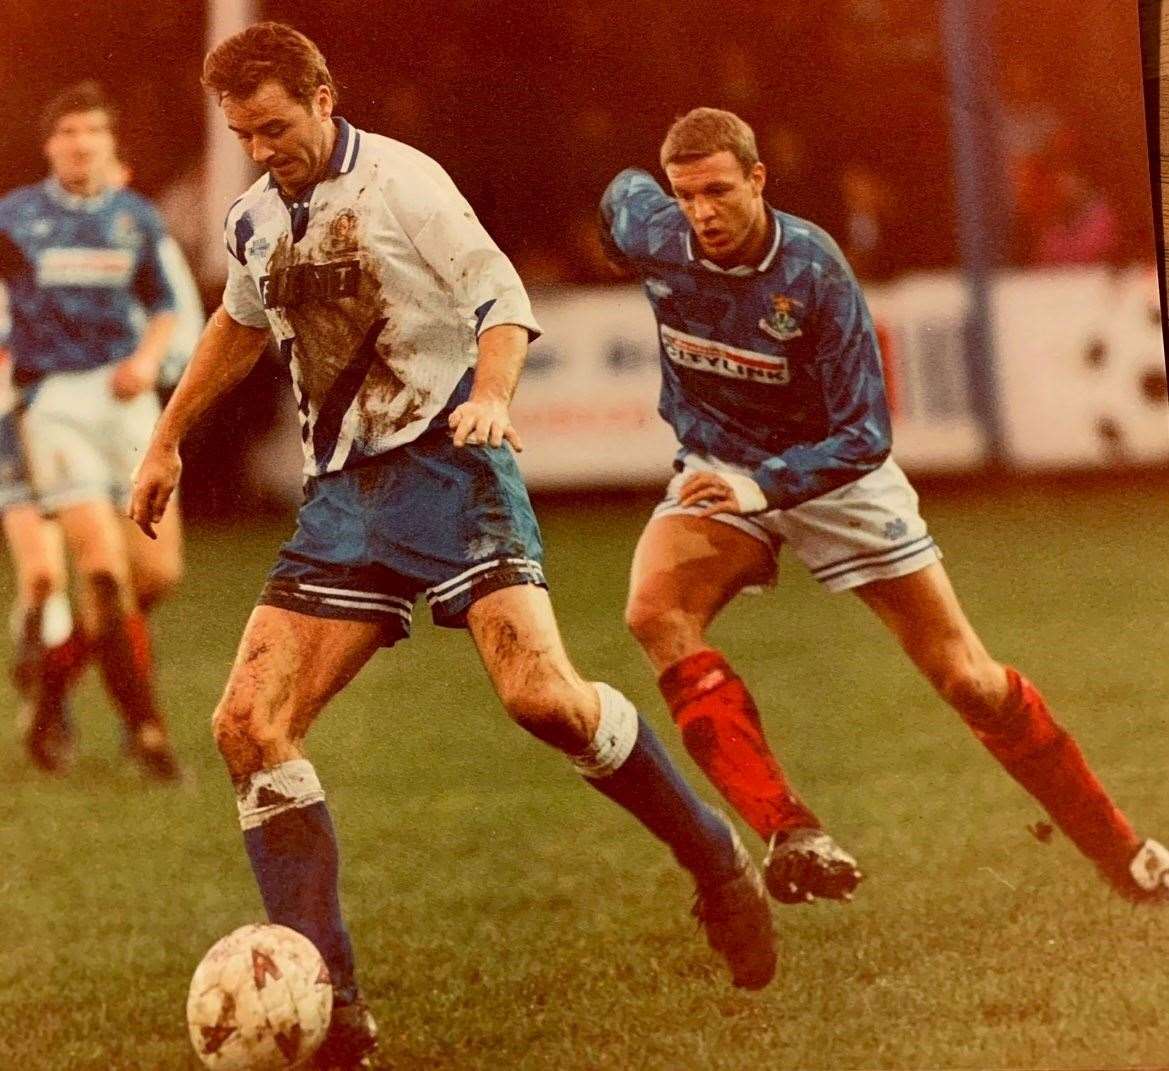 Mark McAllister shuts down an opponent during Caley Thistle's first season.